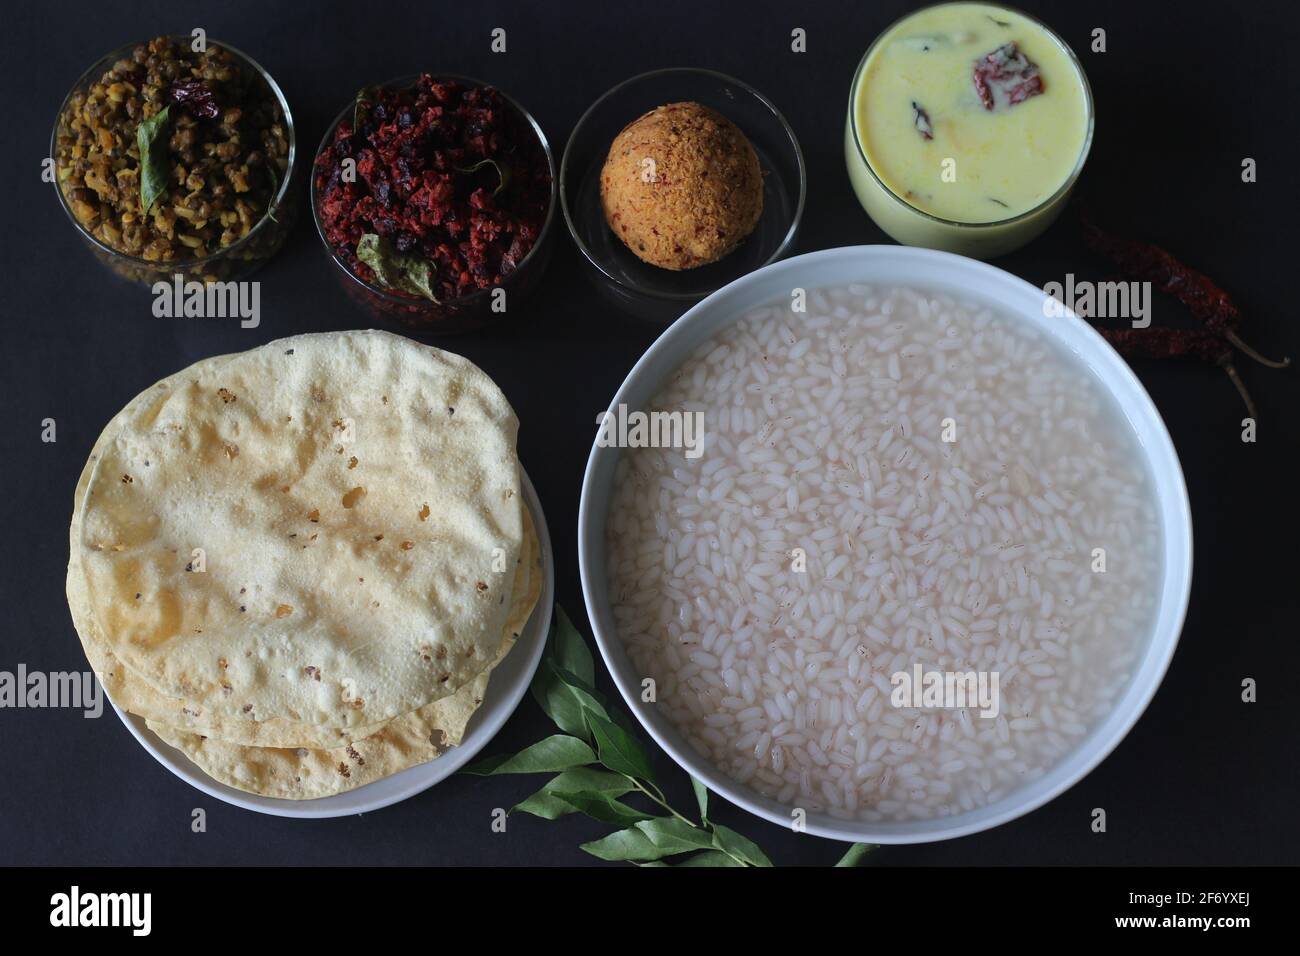 Rice porridge or Kanji along with Coconut chutney, Beetroot potato thoran, stir fried moong, Fried papad and Tempered buttermilk. A favourite meal of Stock Photo